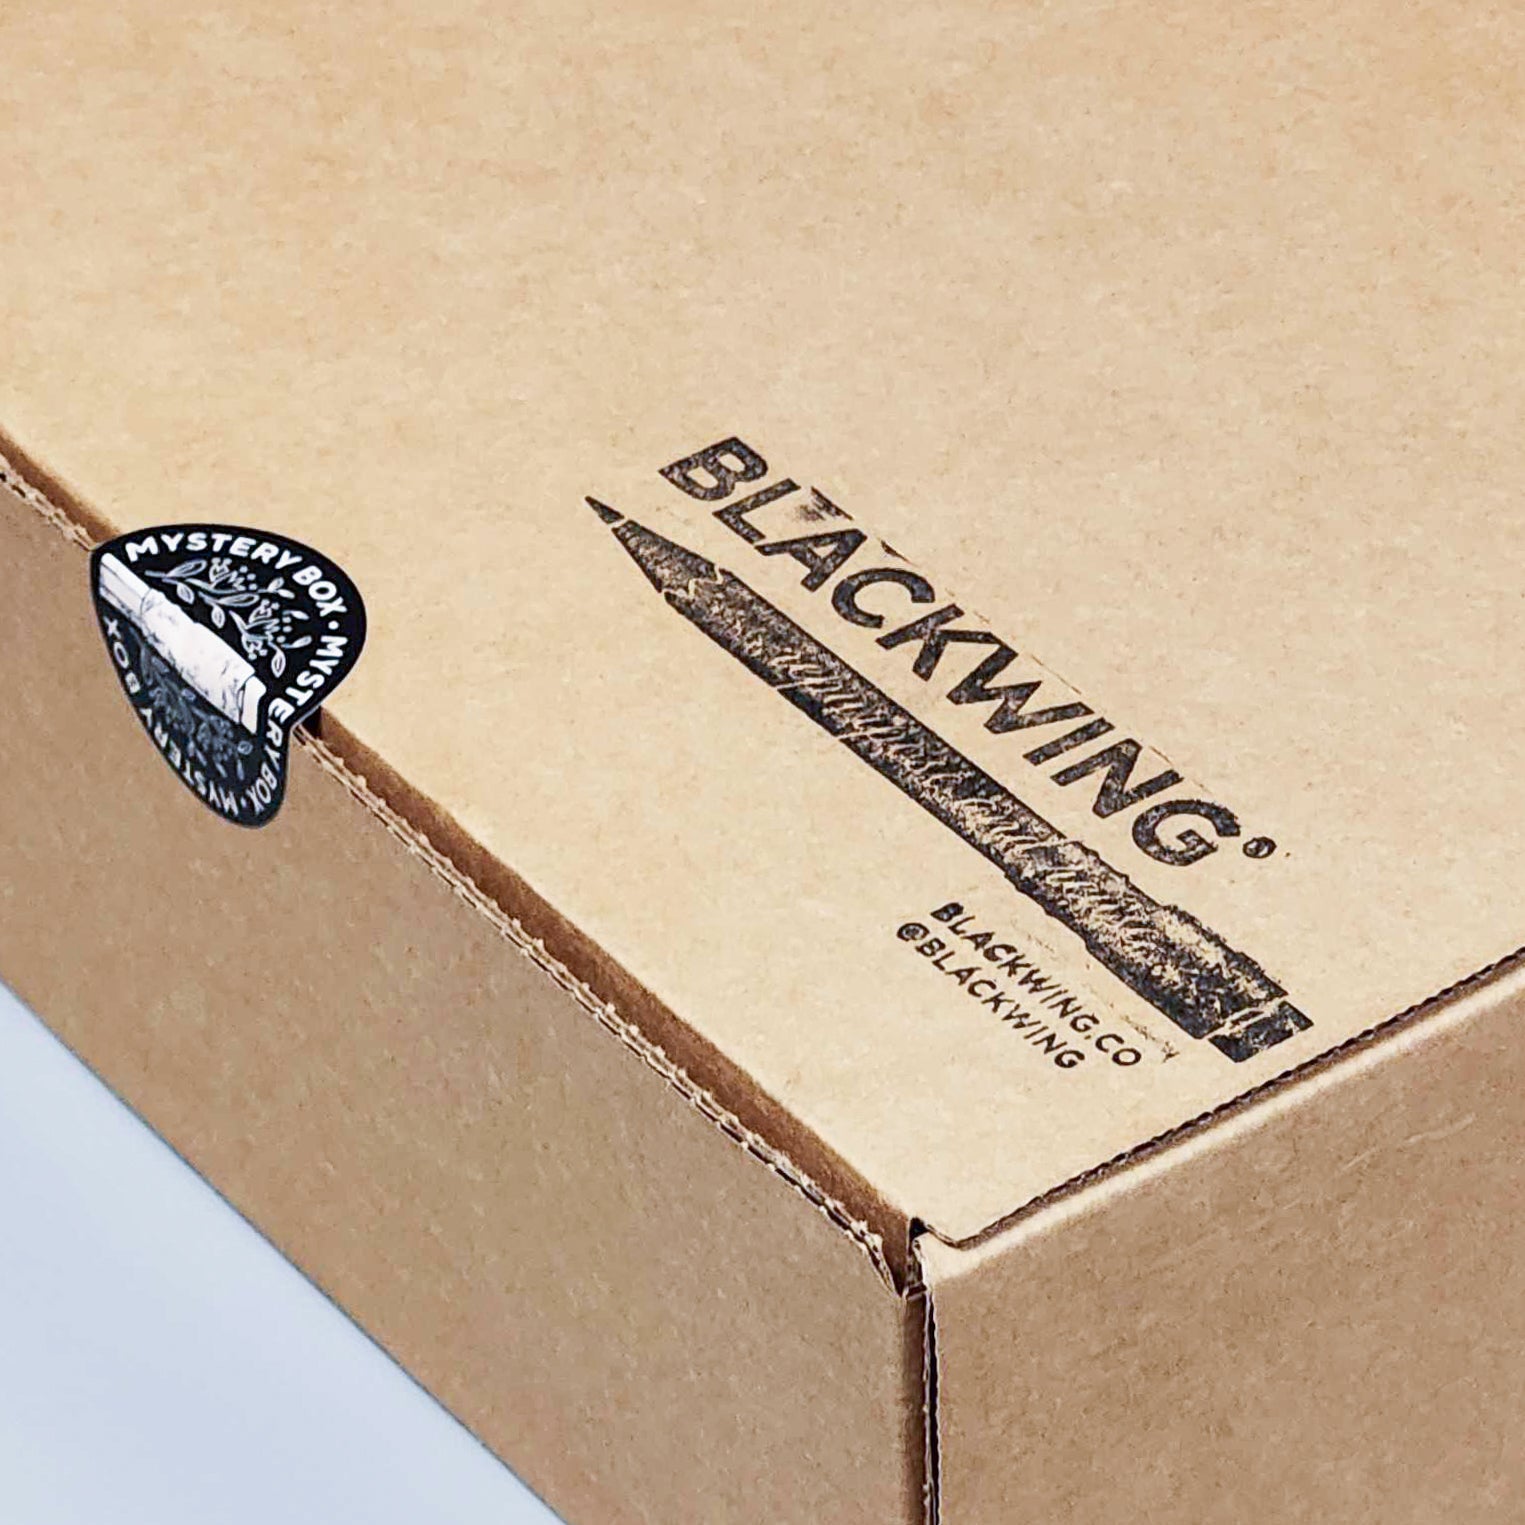 A Blackwing Mystery Box with a Blackwing logo, perfect for pencil enthusiasts who love a bit of mystery.